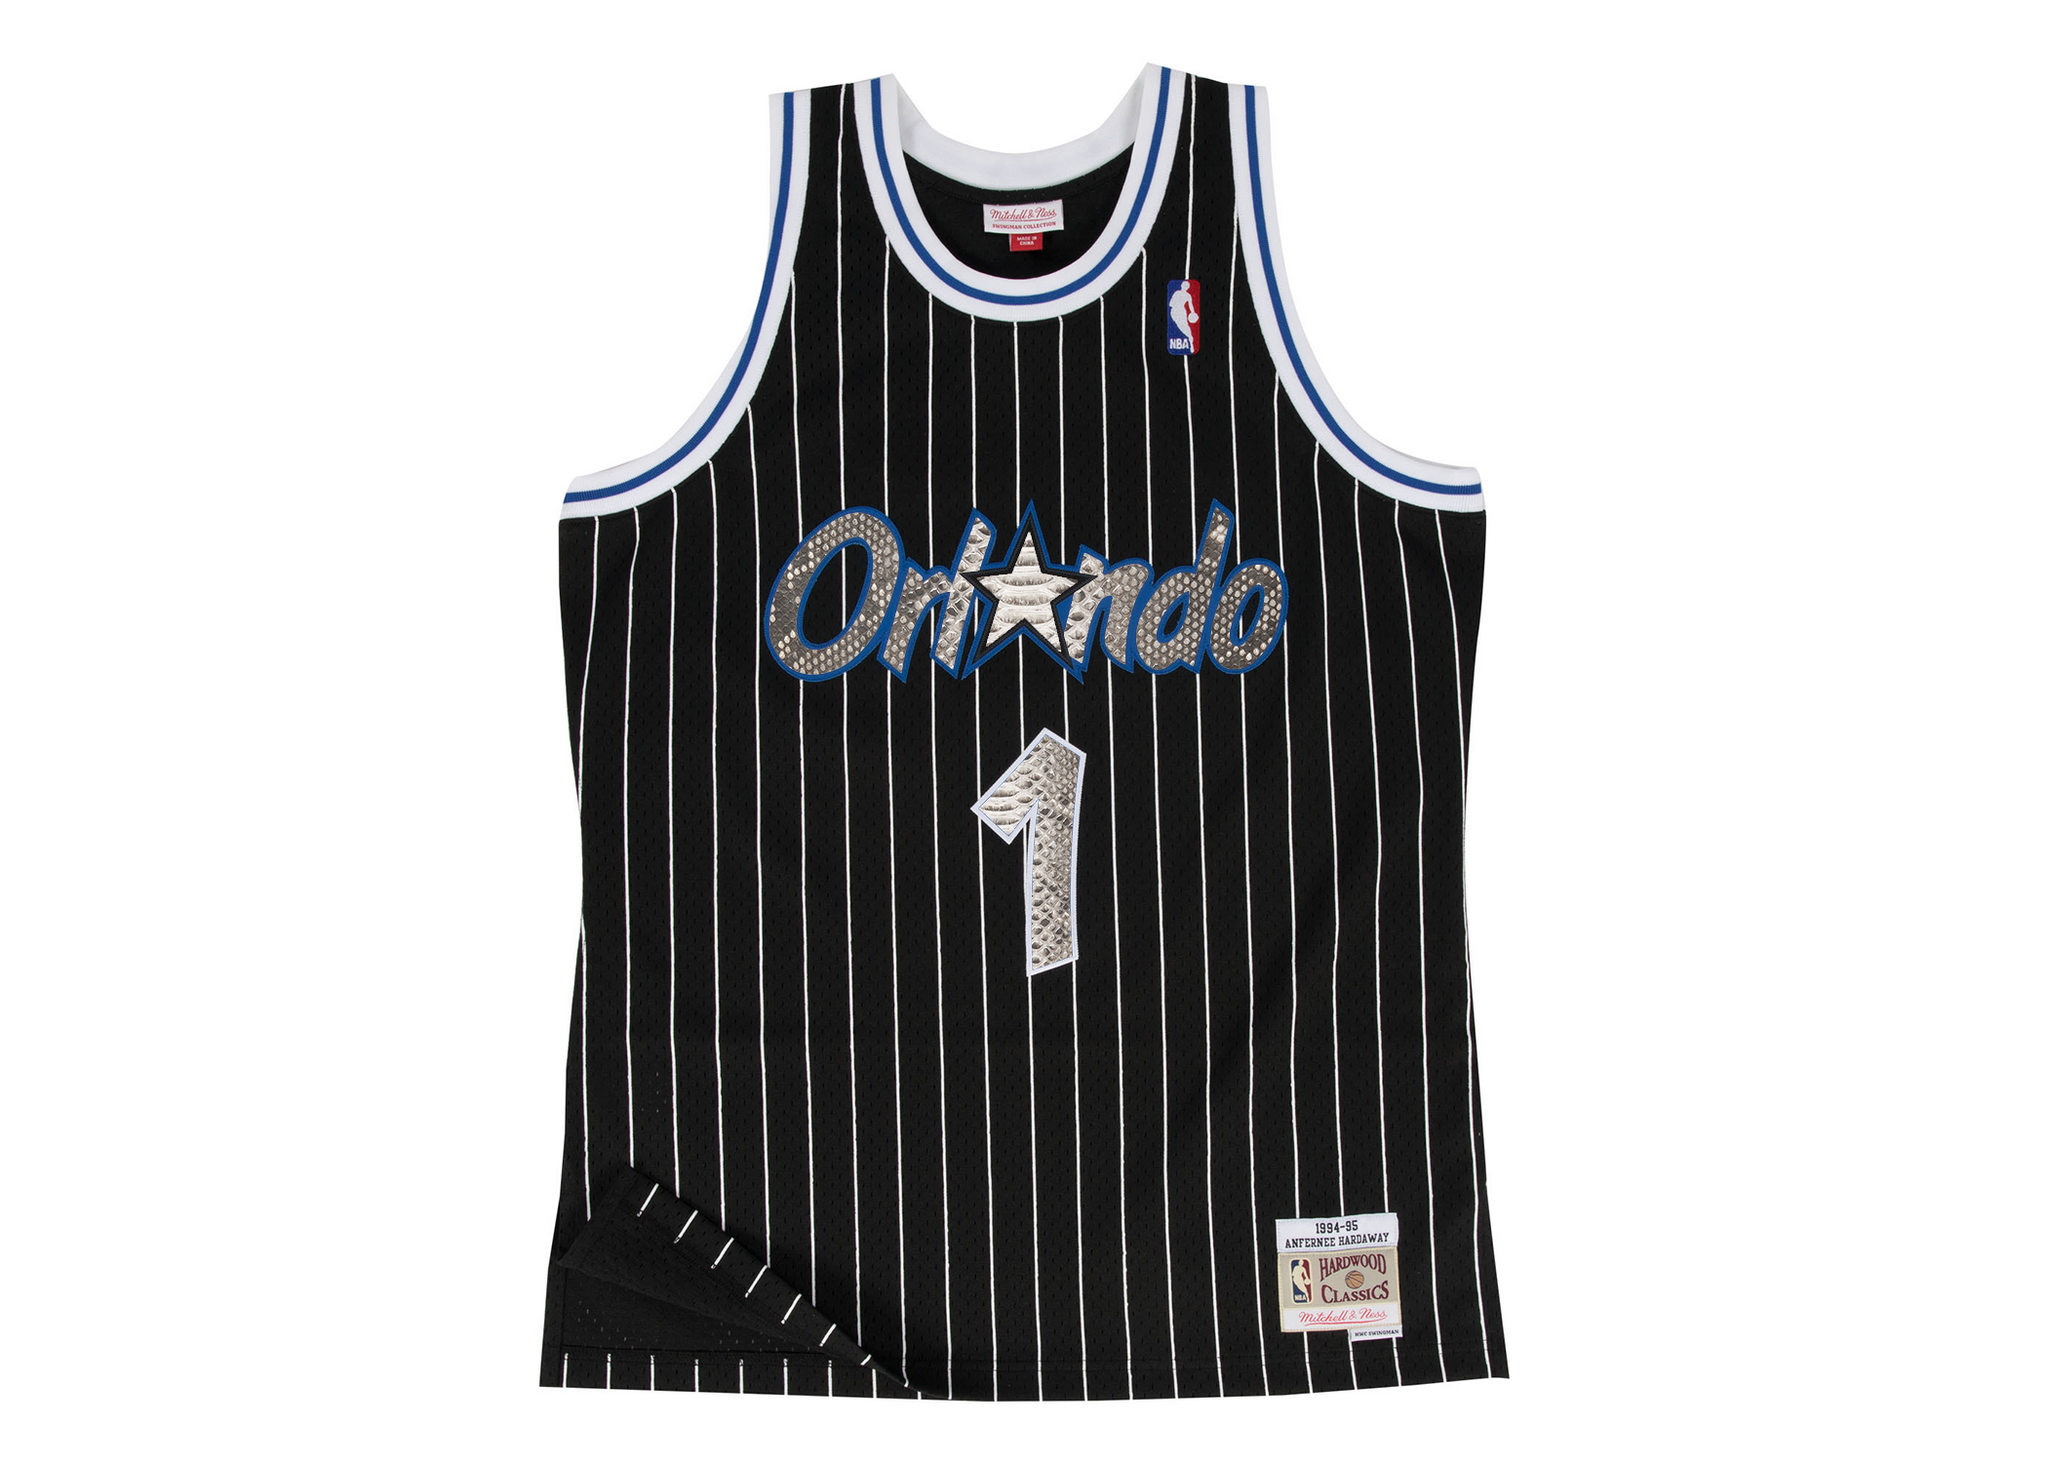 penny hardaway mitchell and ness